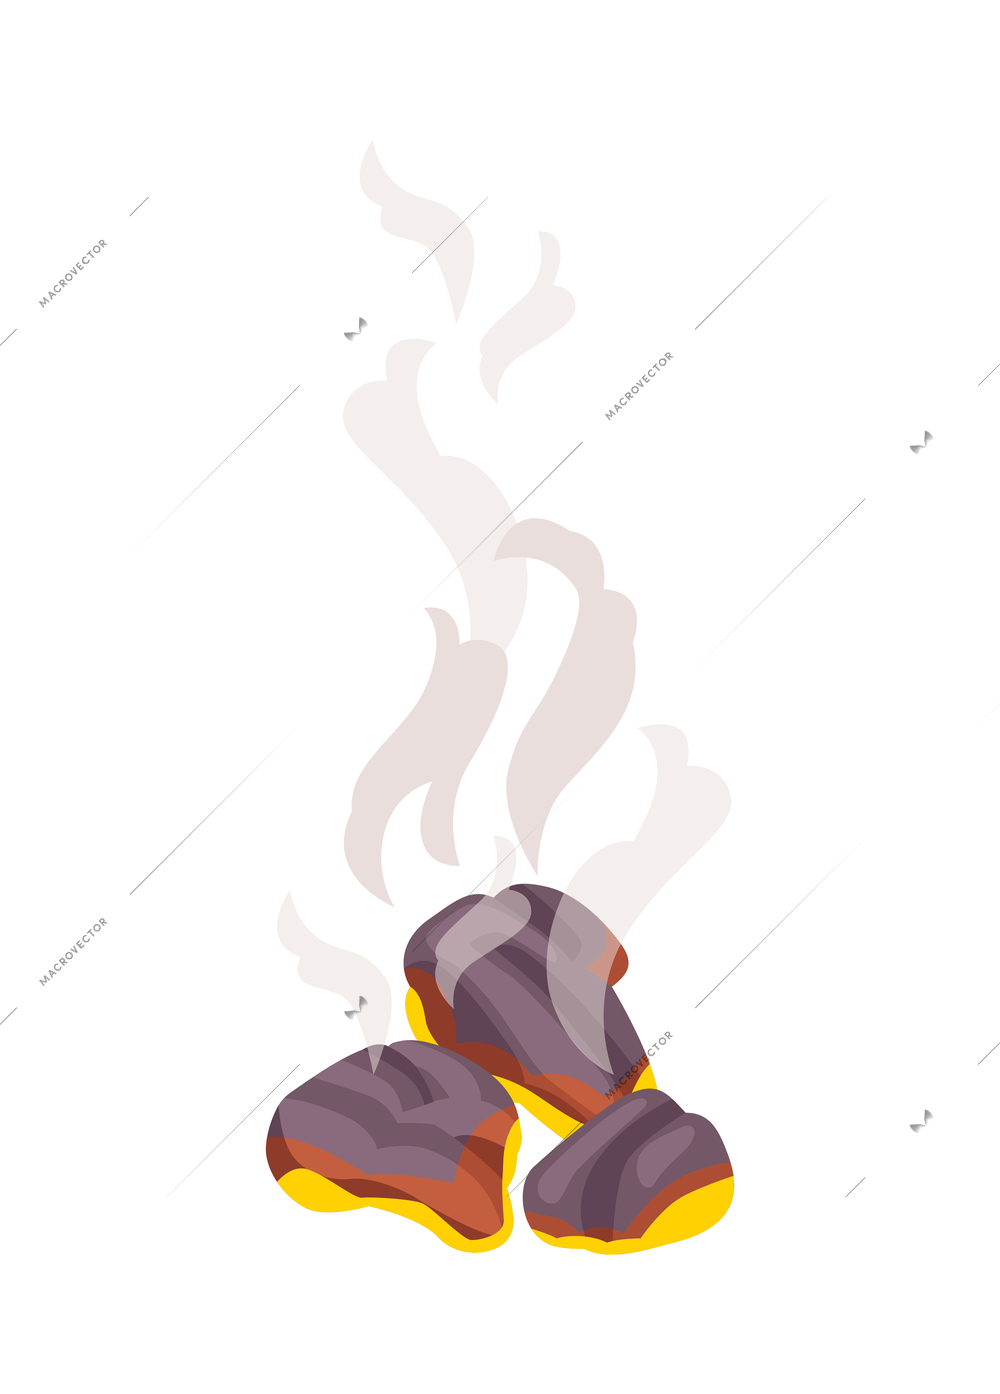 Isometric bbq barbecue grill party composition with isolated image of coal pieces with smoke vector illustration